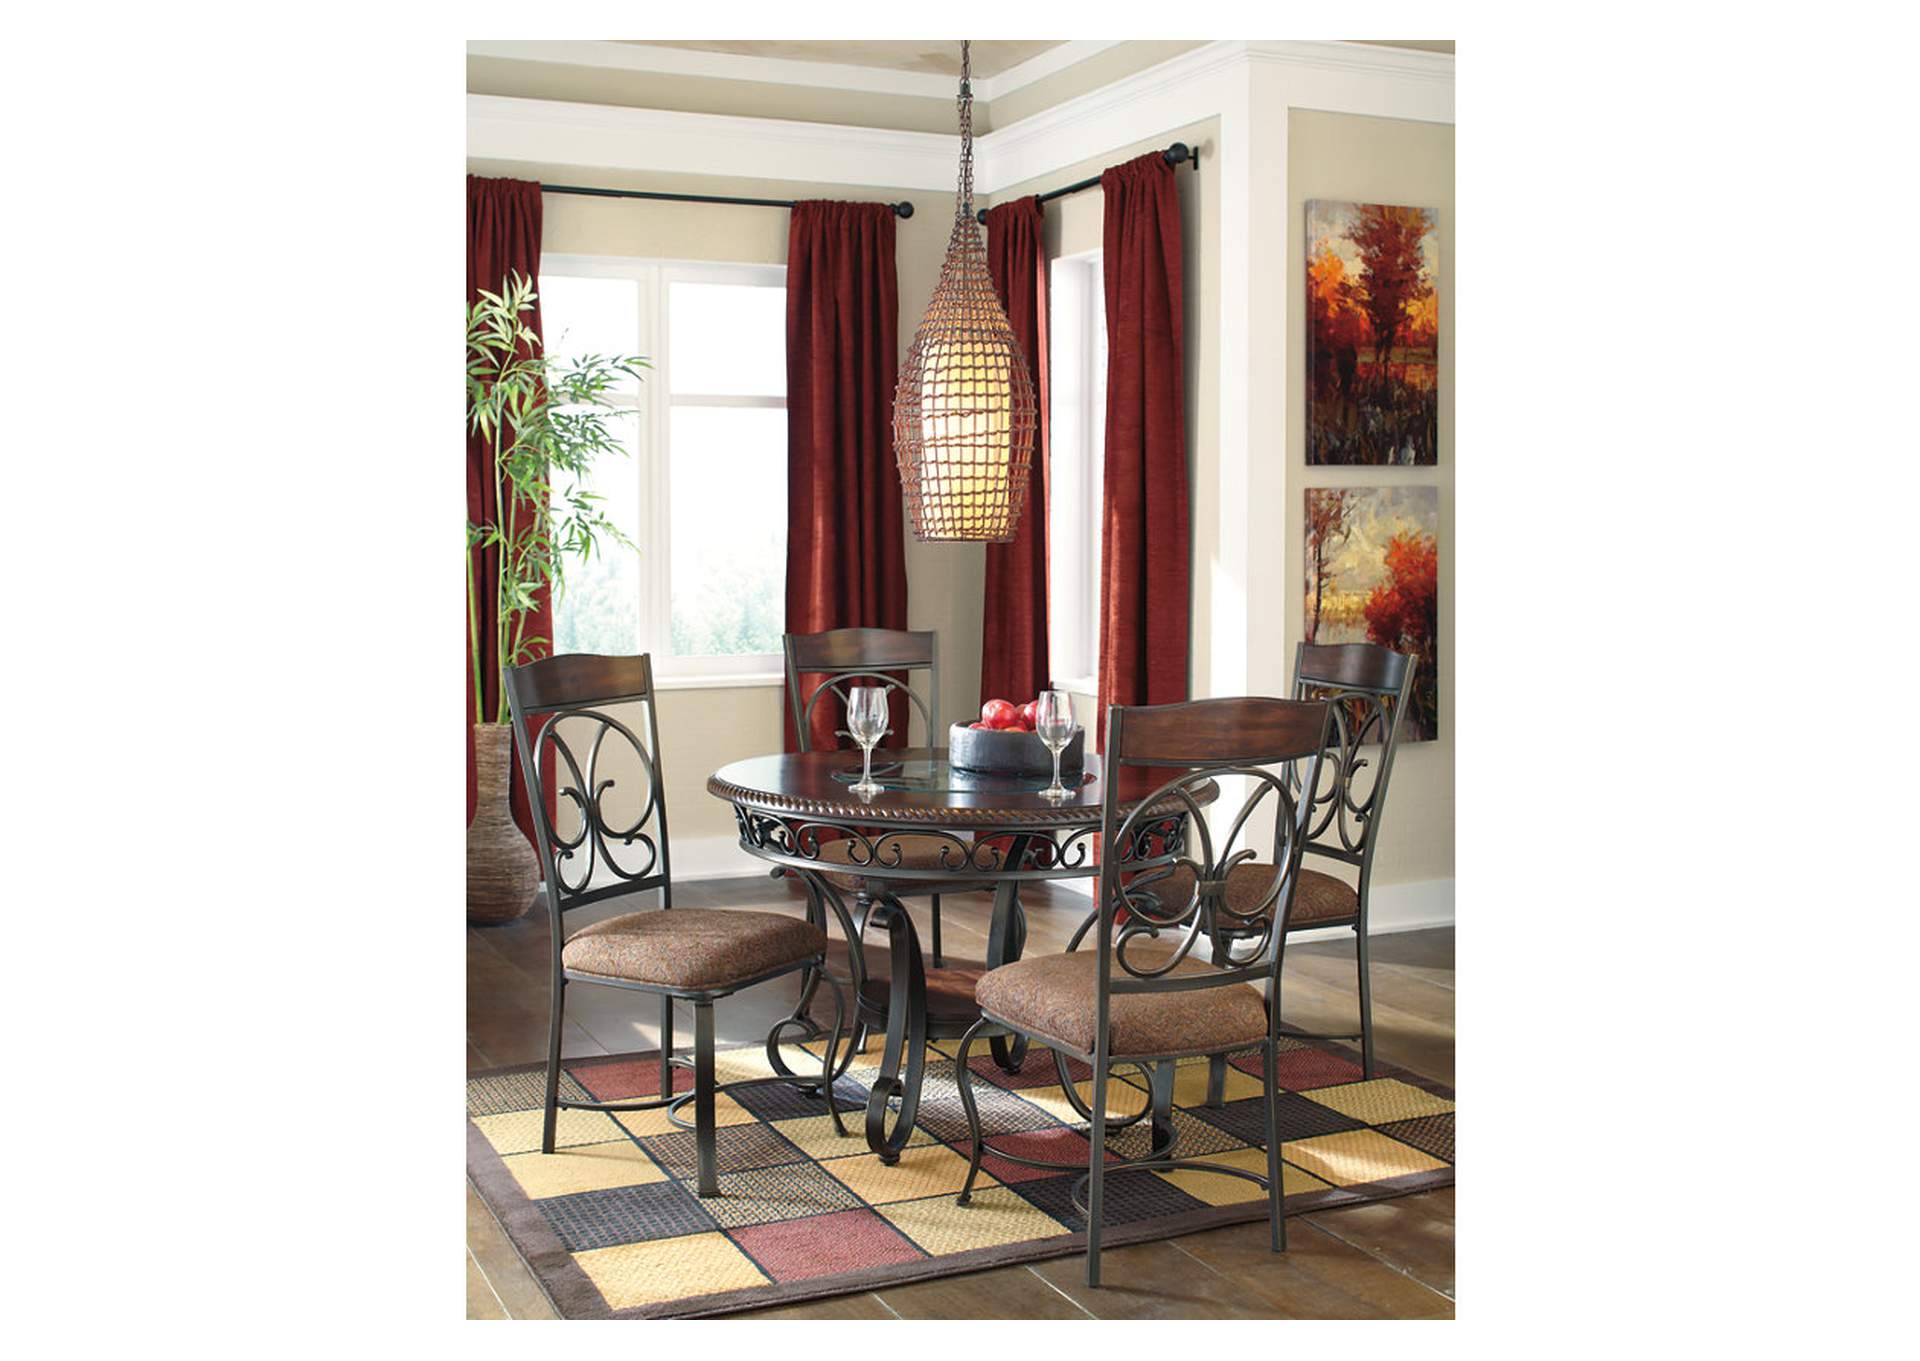 Glambrey Dining Table and 4 Chairs,Signature Design By Ashley